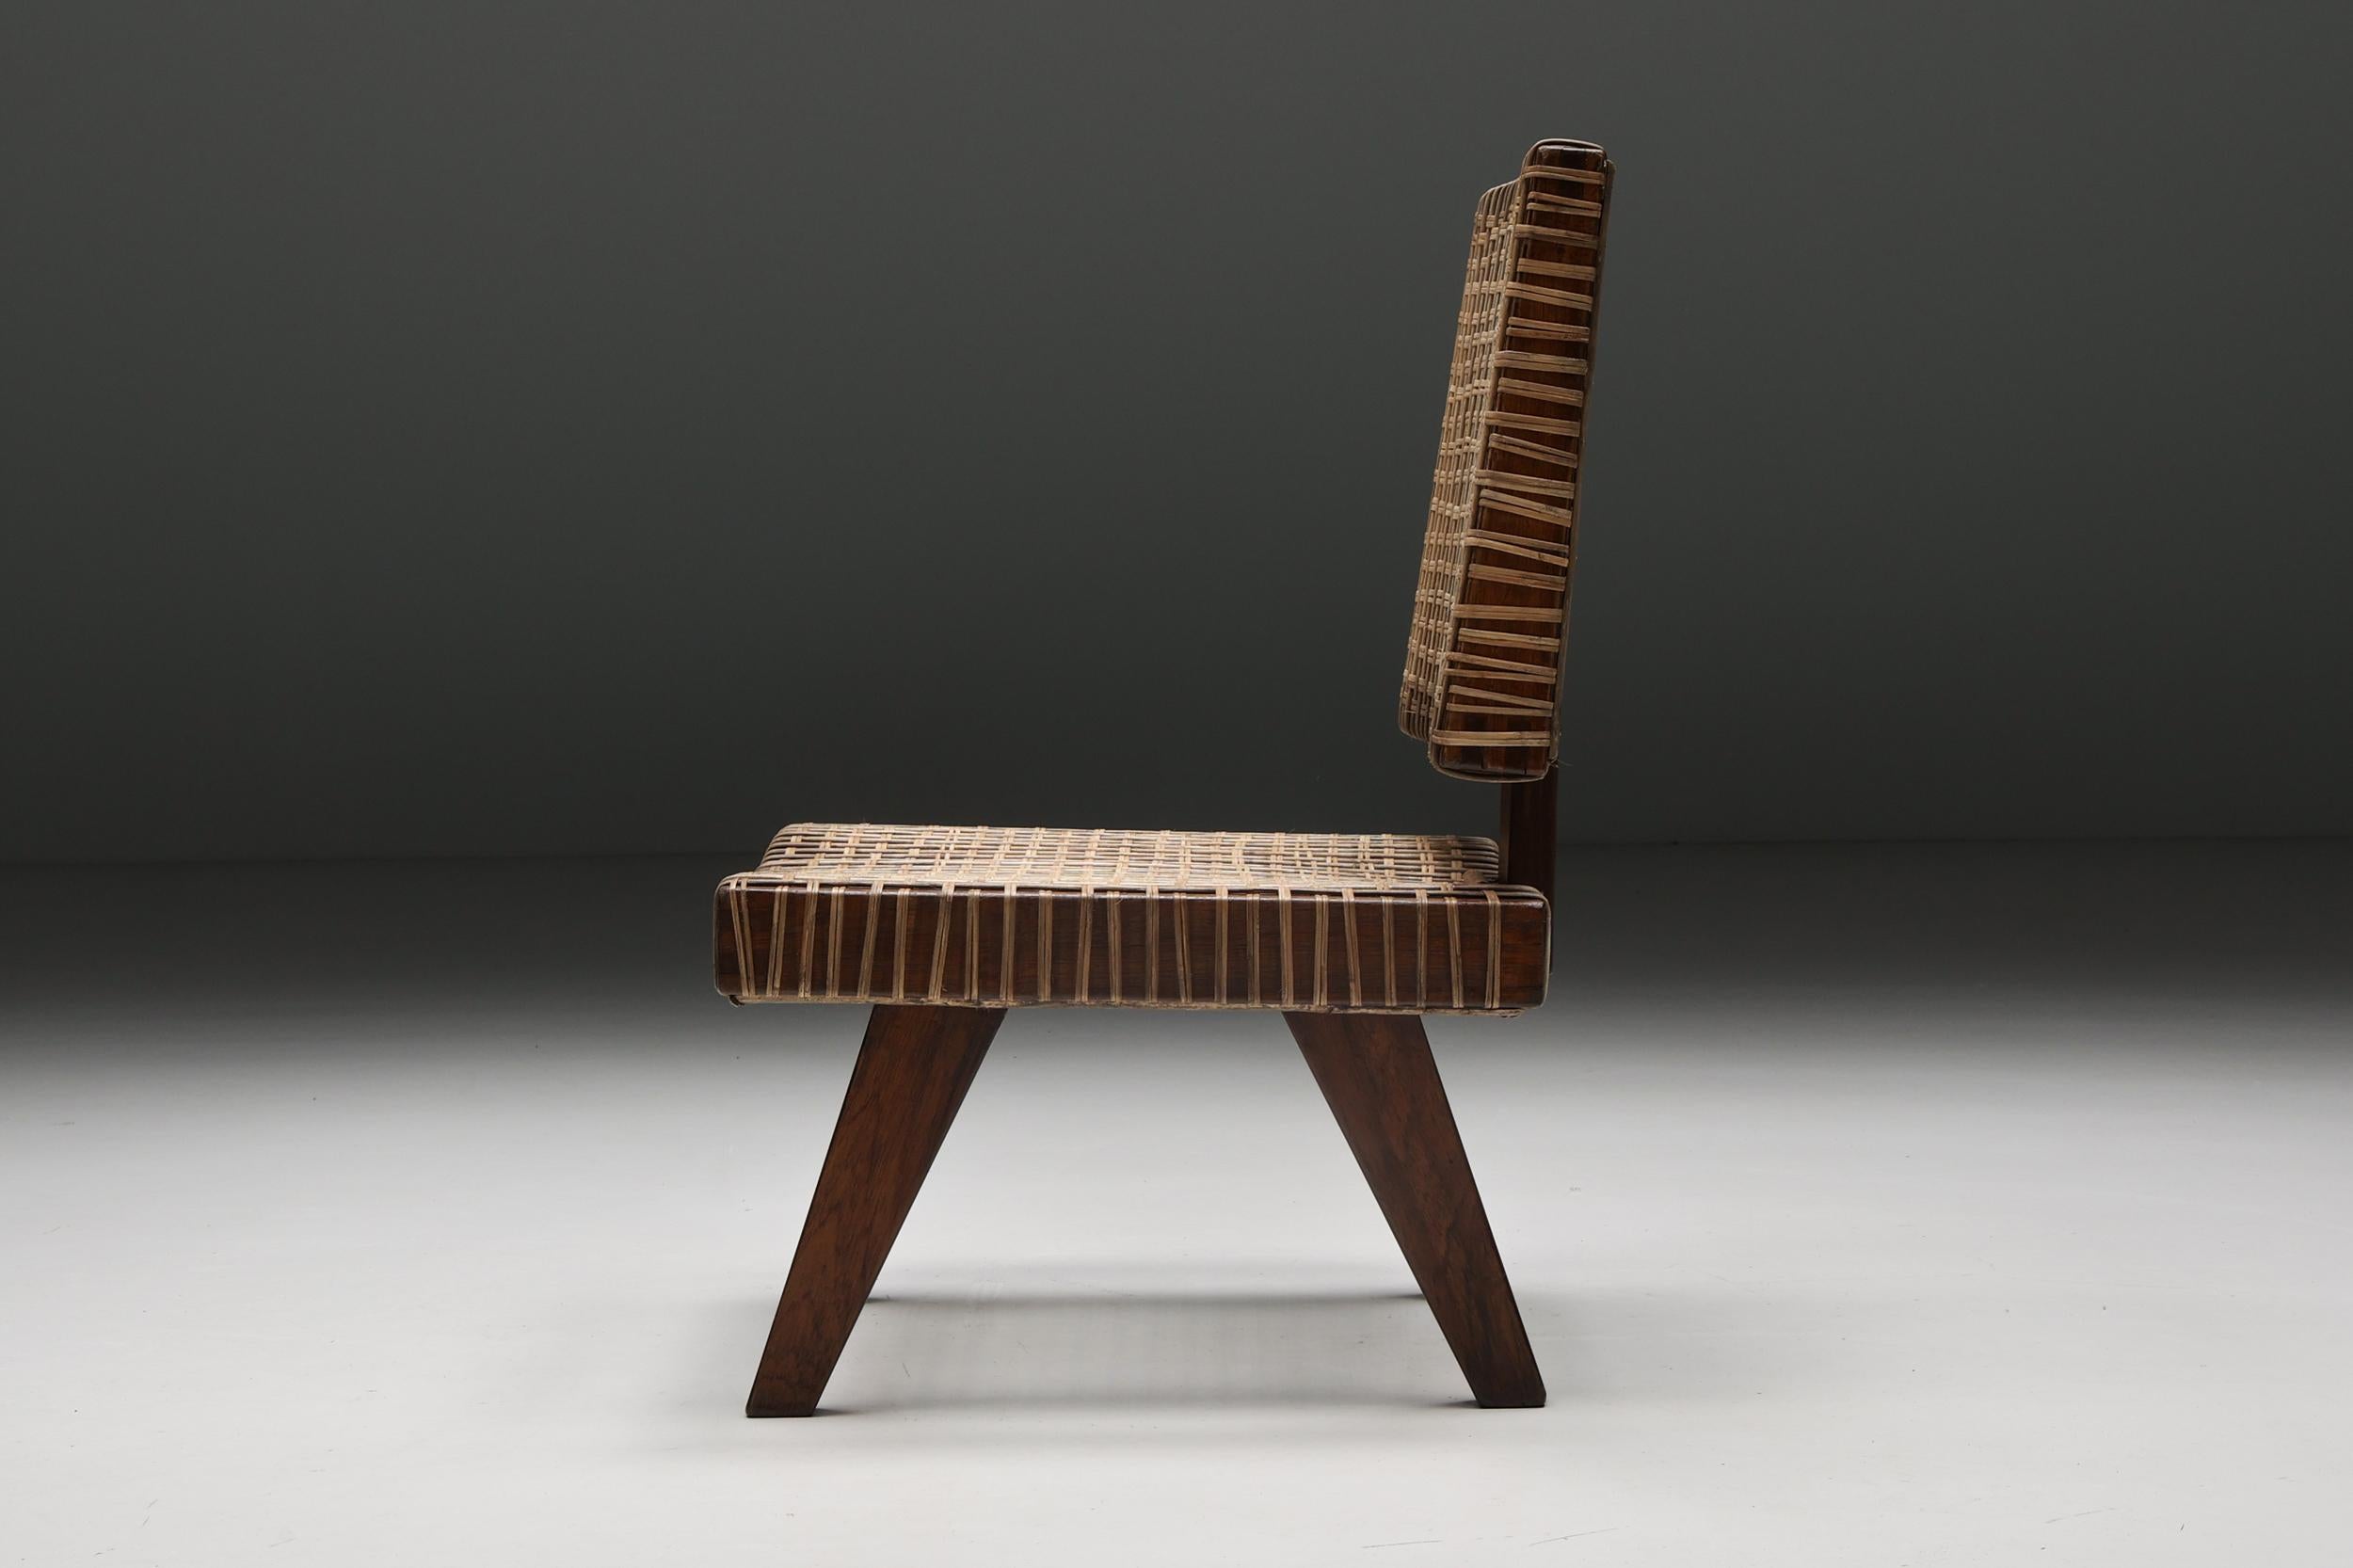 Teak Pierre Jeanneret, Rare Armless Easy Chair, Chandigarh, 1955 For Sale